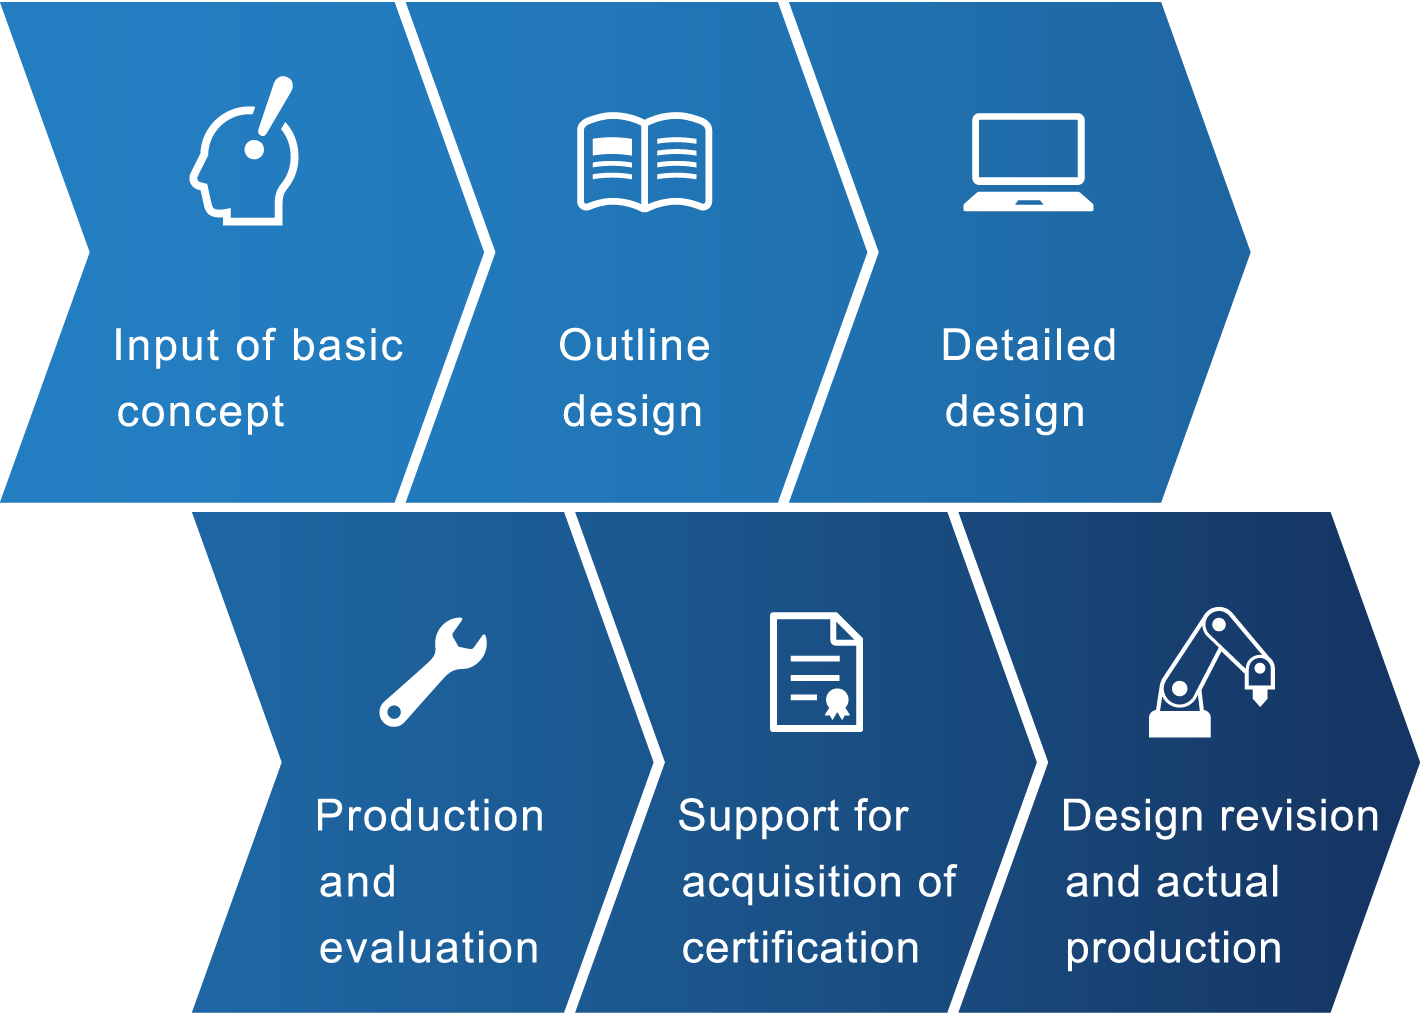 Input of basic concept,Outline design,Detailed design,Production and evaluation,Support for acquisition of certification,Design revision and actual production